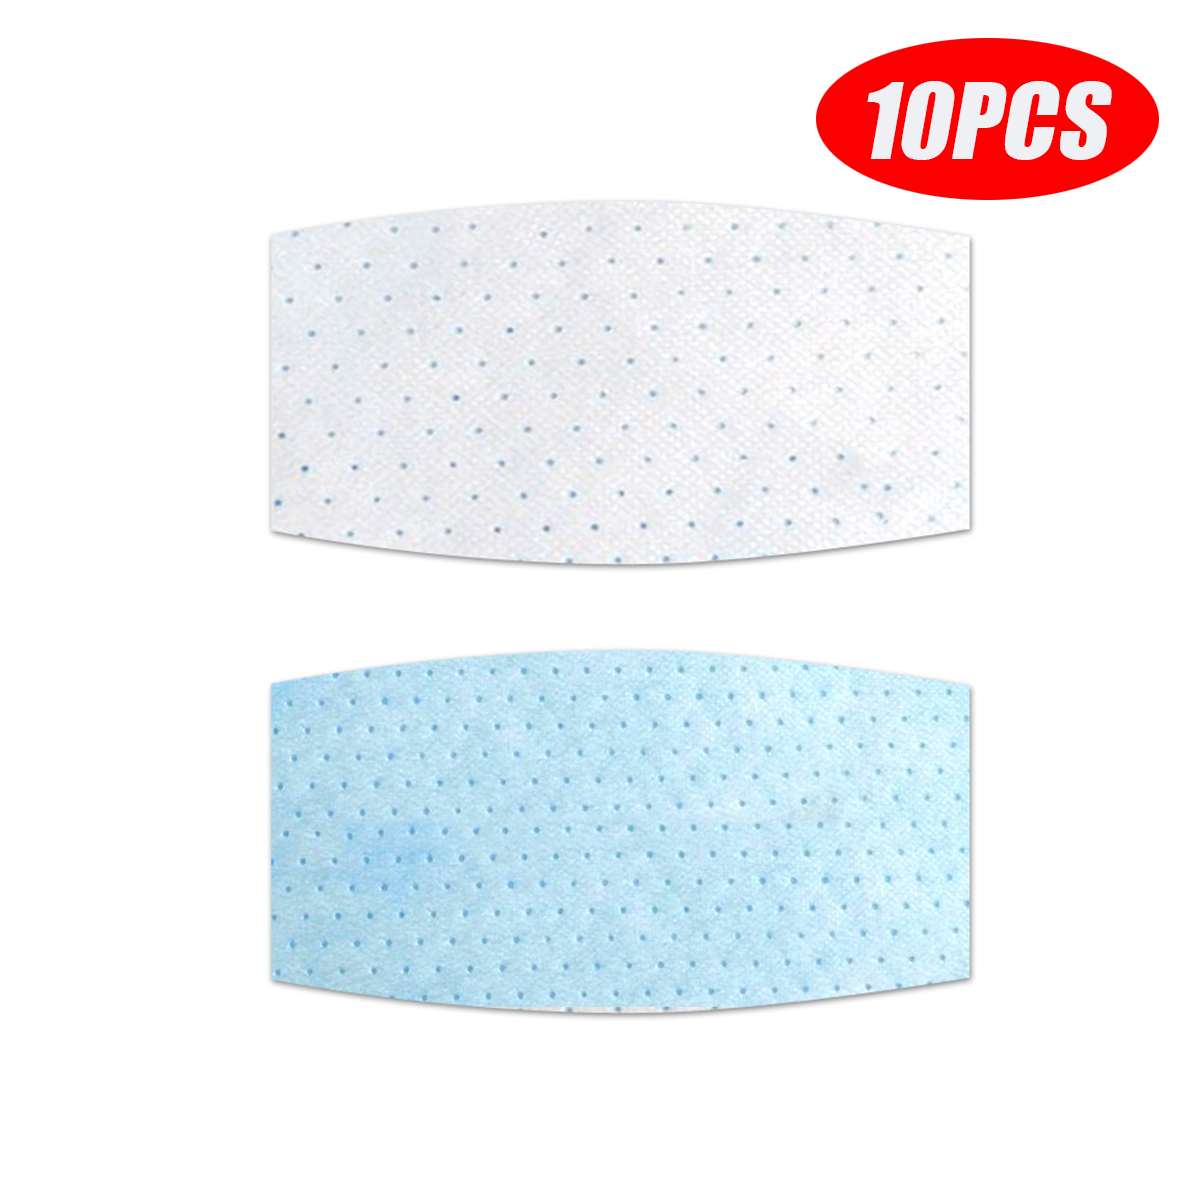 10Pcs-Disposable-Face-Mask-Gasket-Safety-Health-Care-Mouth-Face-Mask-Filter-Pad-1658535-9